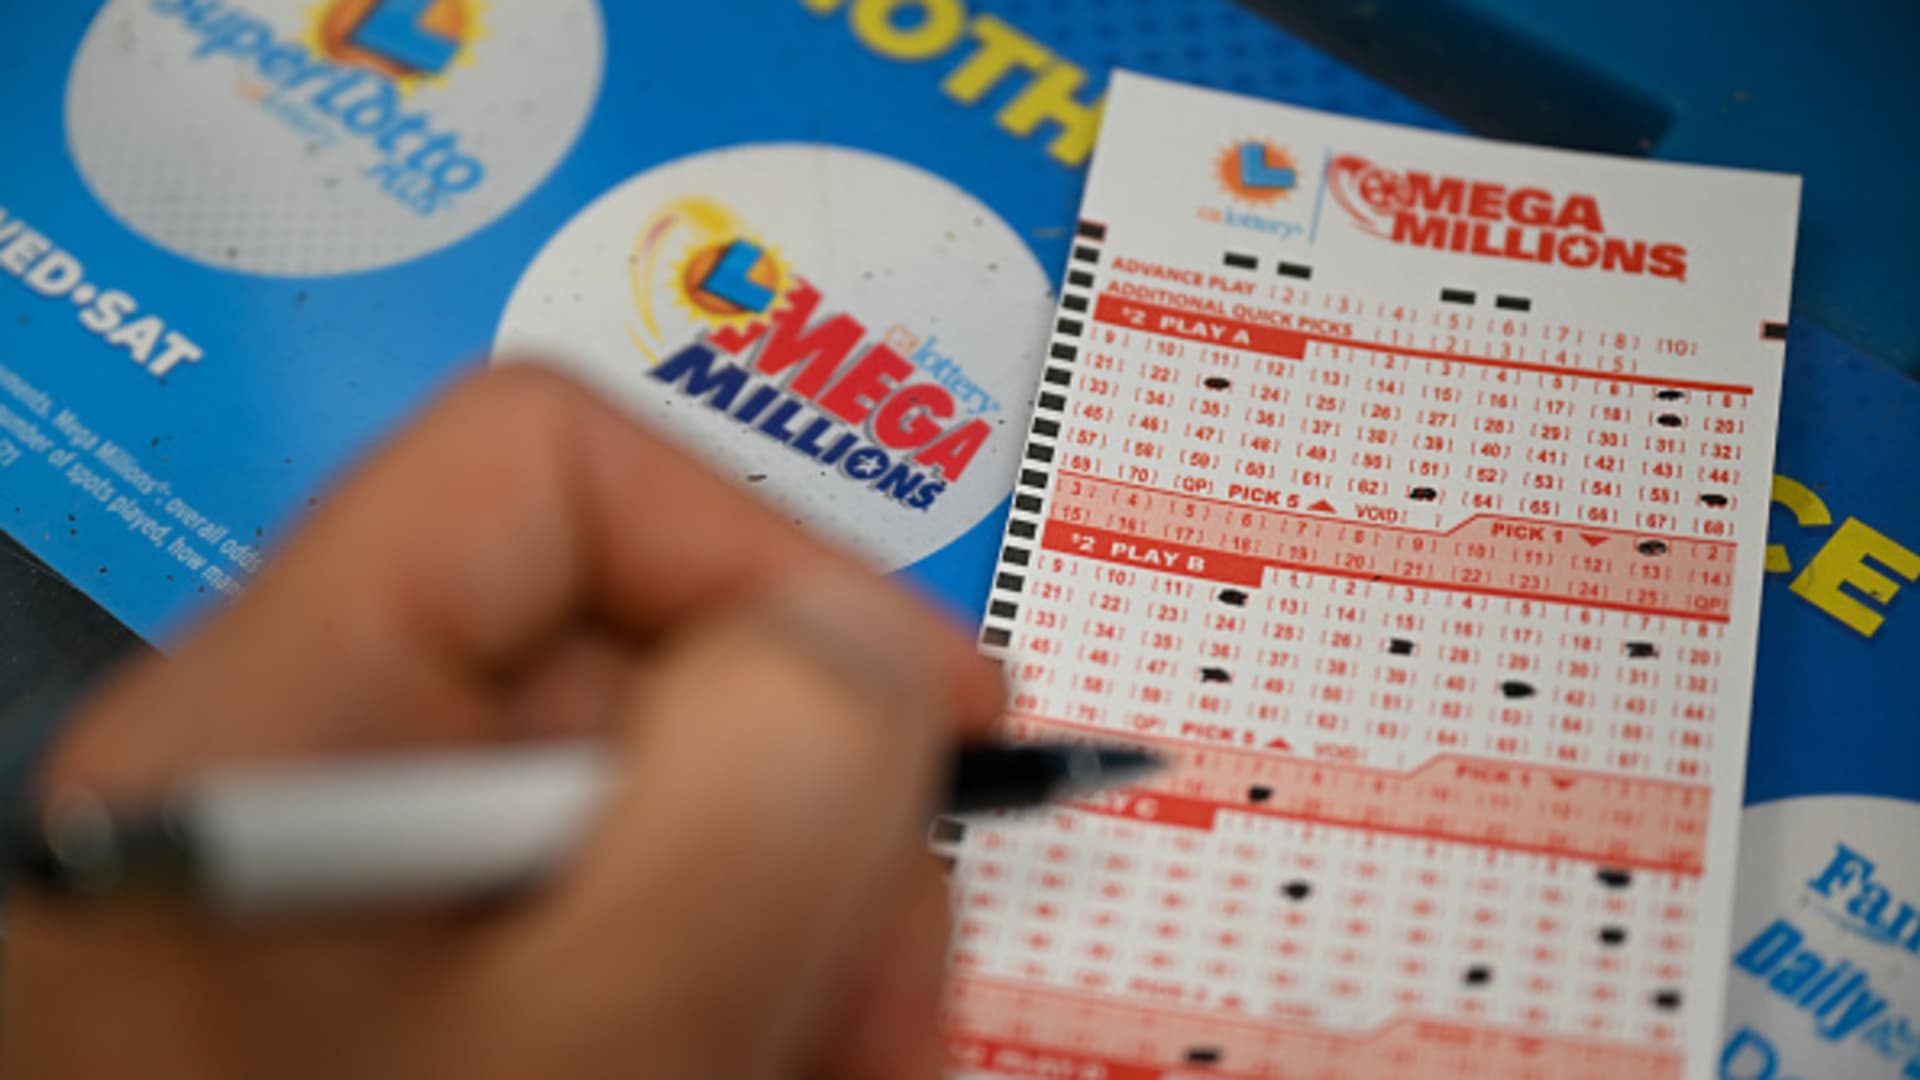 Mega Millions jackpot hits $977 million. Here's what financial experts say to do if you score the winning ticket